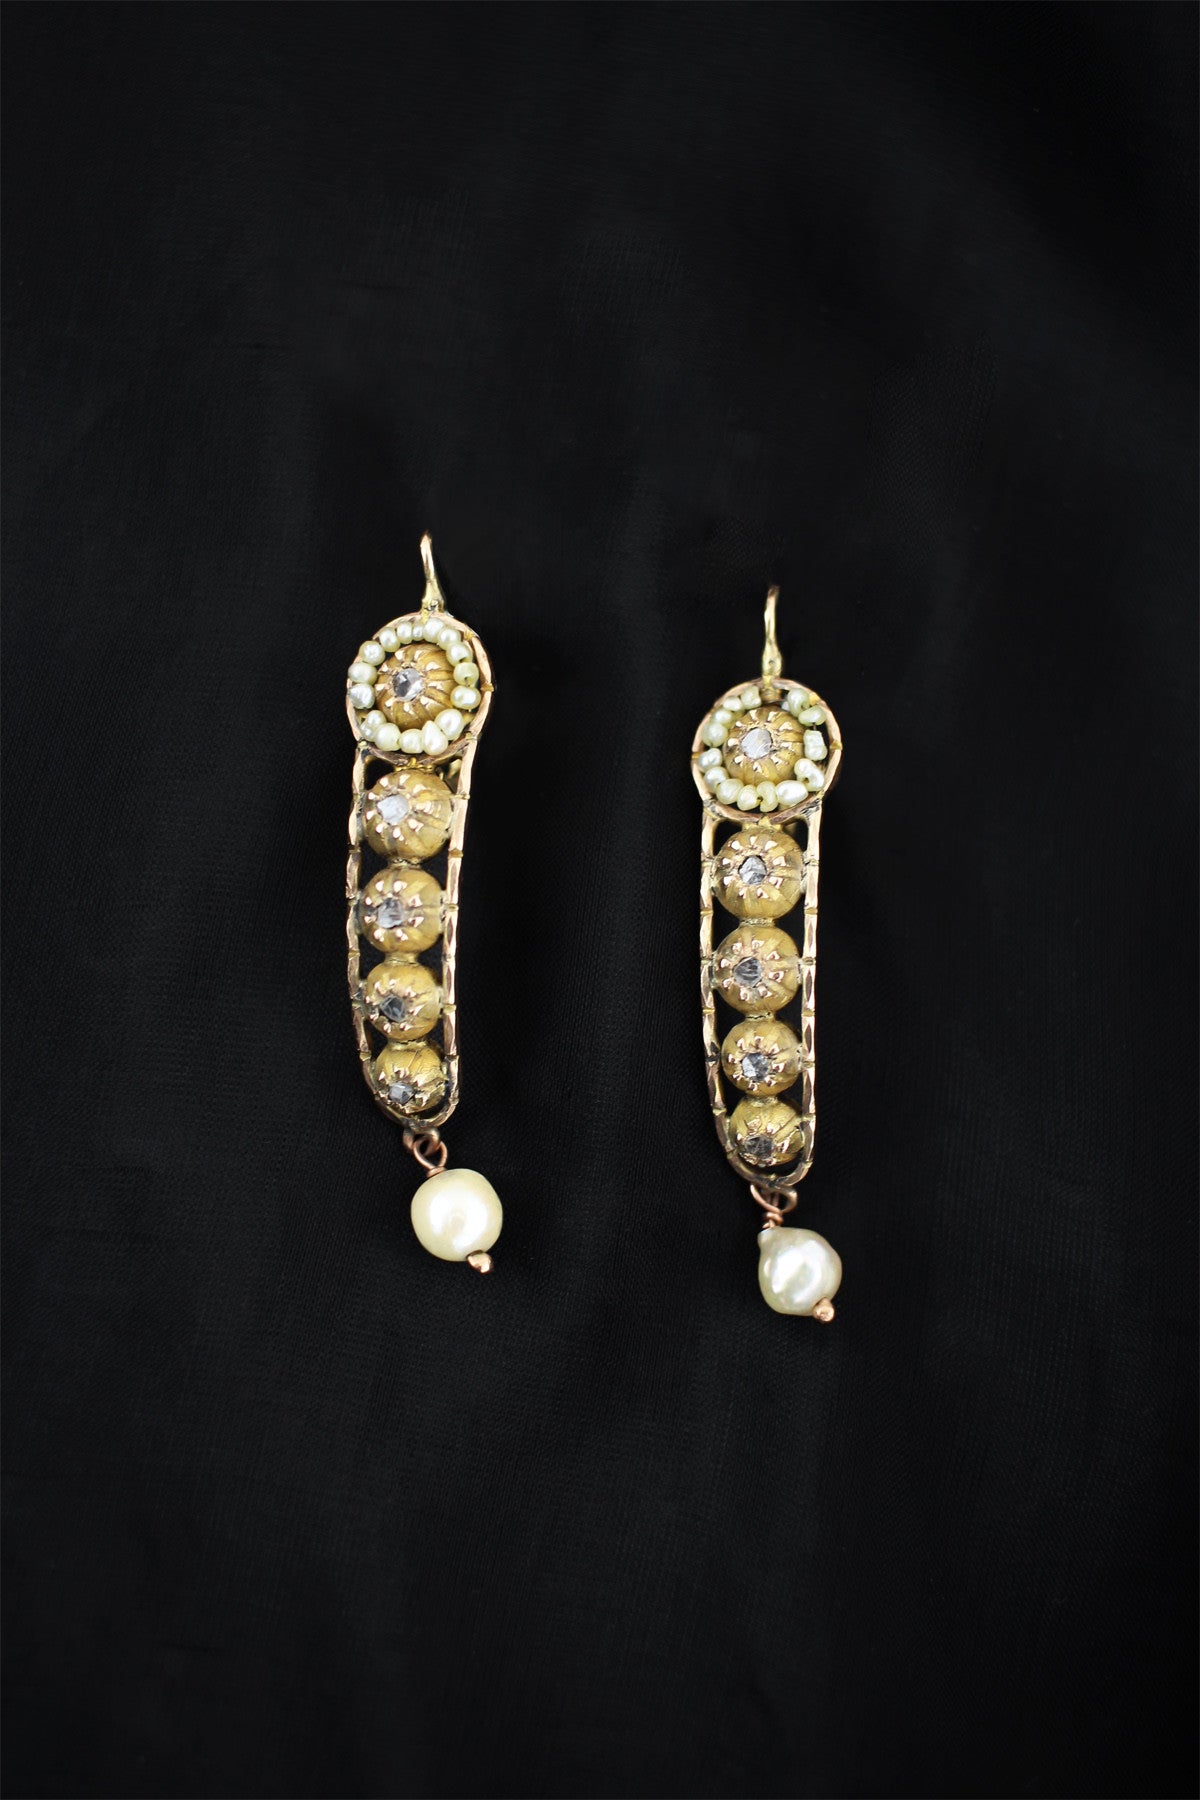 Exquisite Antique Victorian Rose Cut Diamond and Pearl Earrings